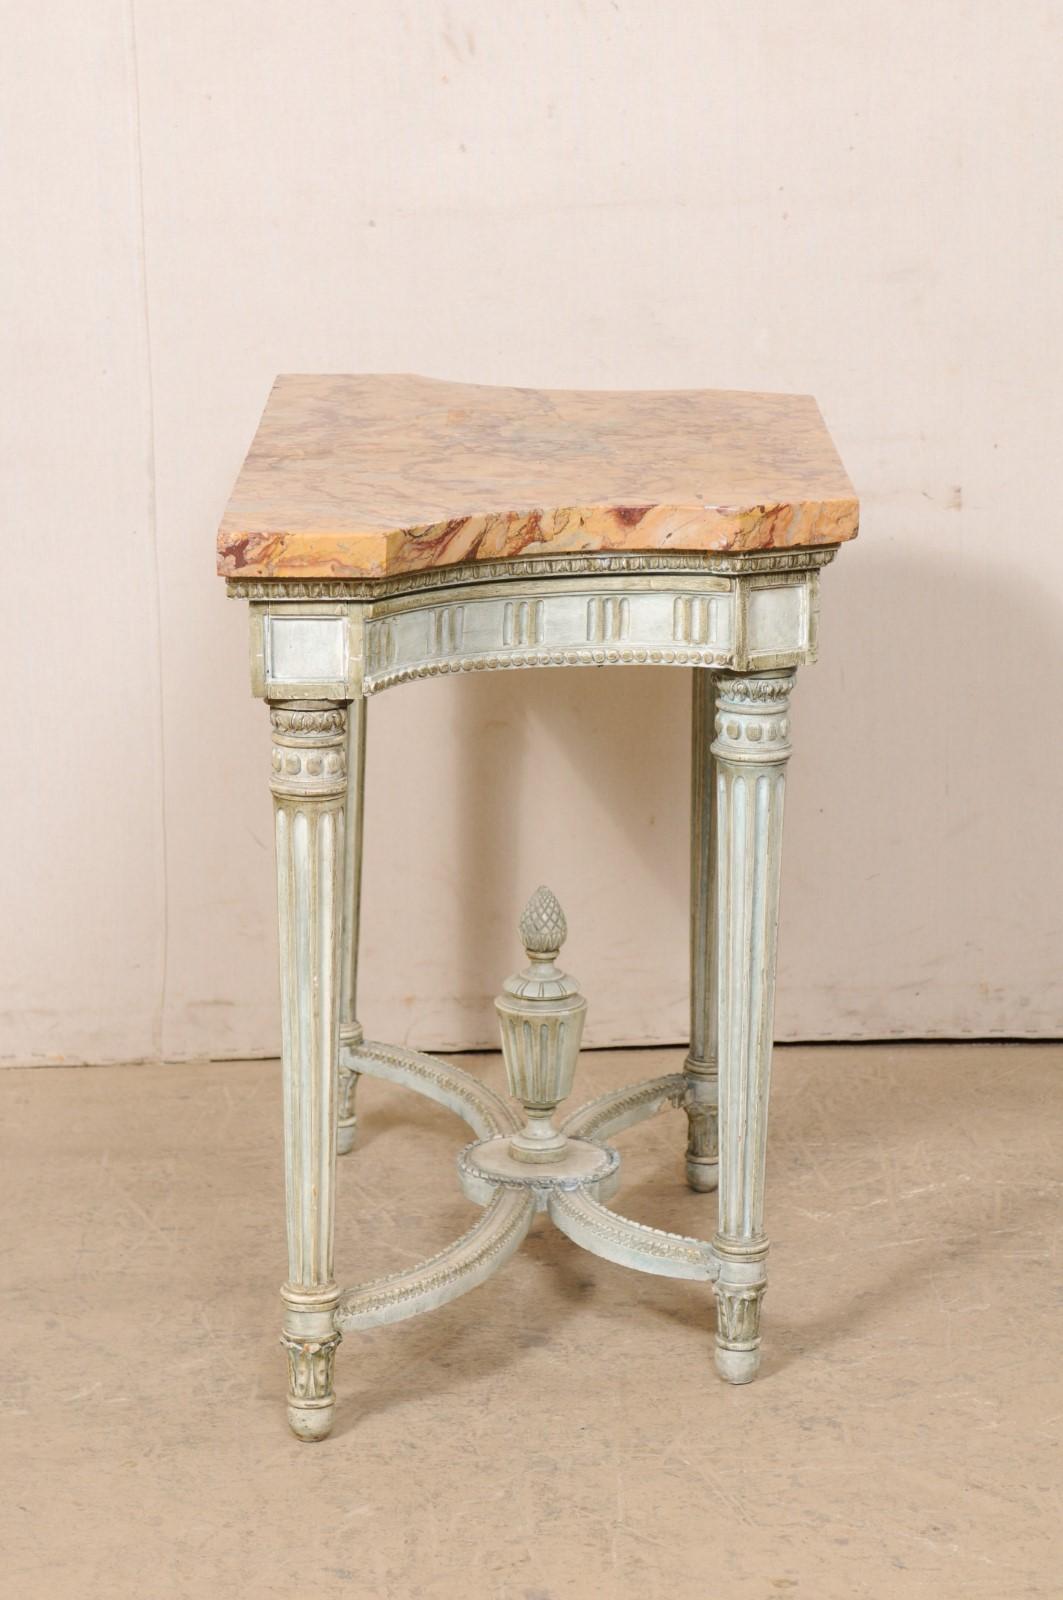 19th Century French Neoclassic Period Marble Top Console w/Carved Urn Finial at Underside For Sale